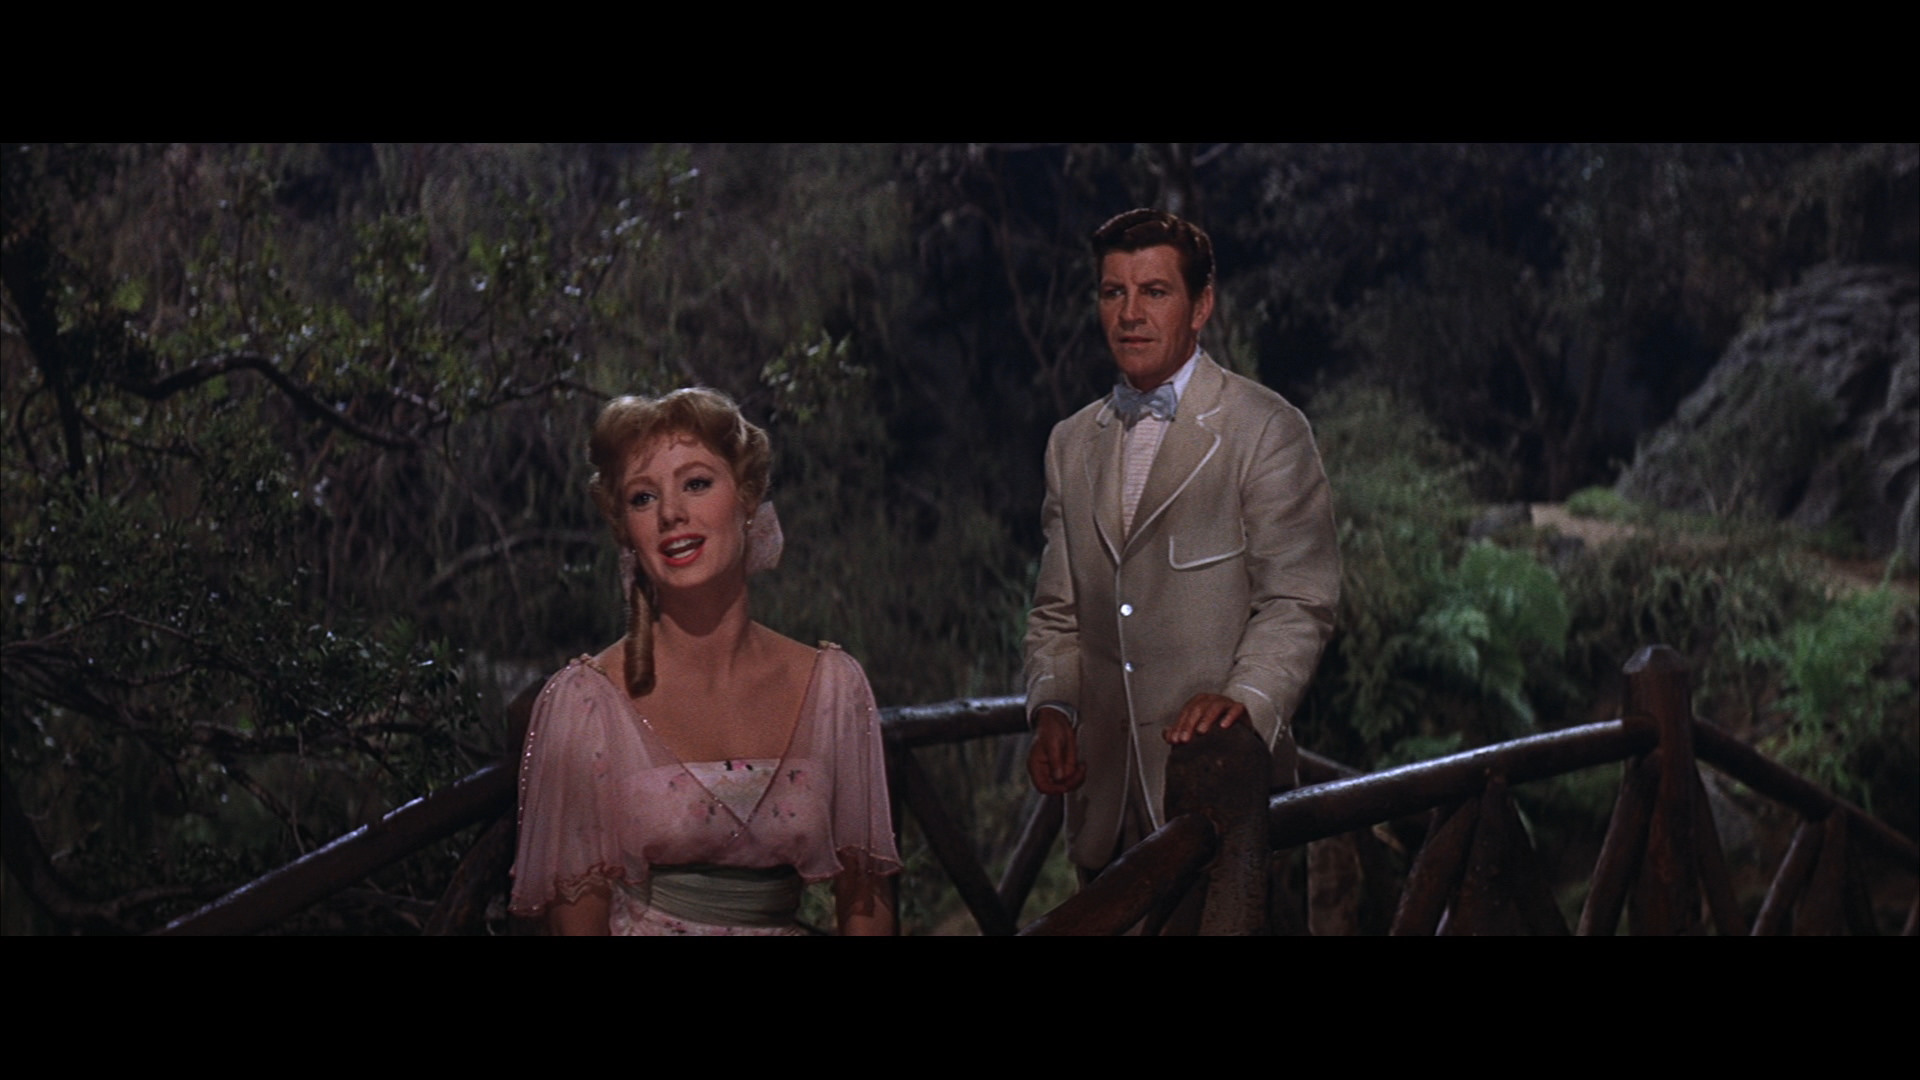 The talented Robert Preston and the very very lovely Shirley Jones - my win...